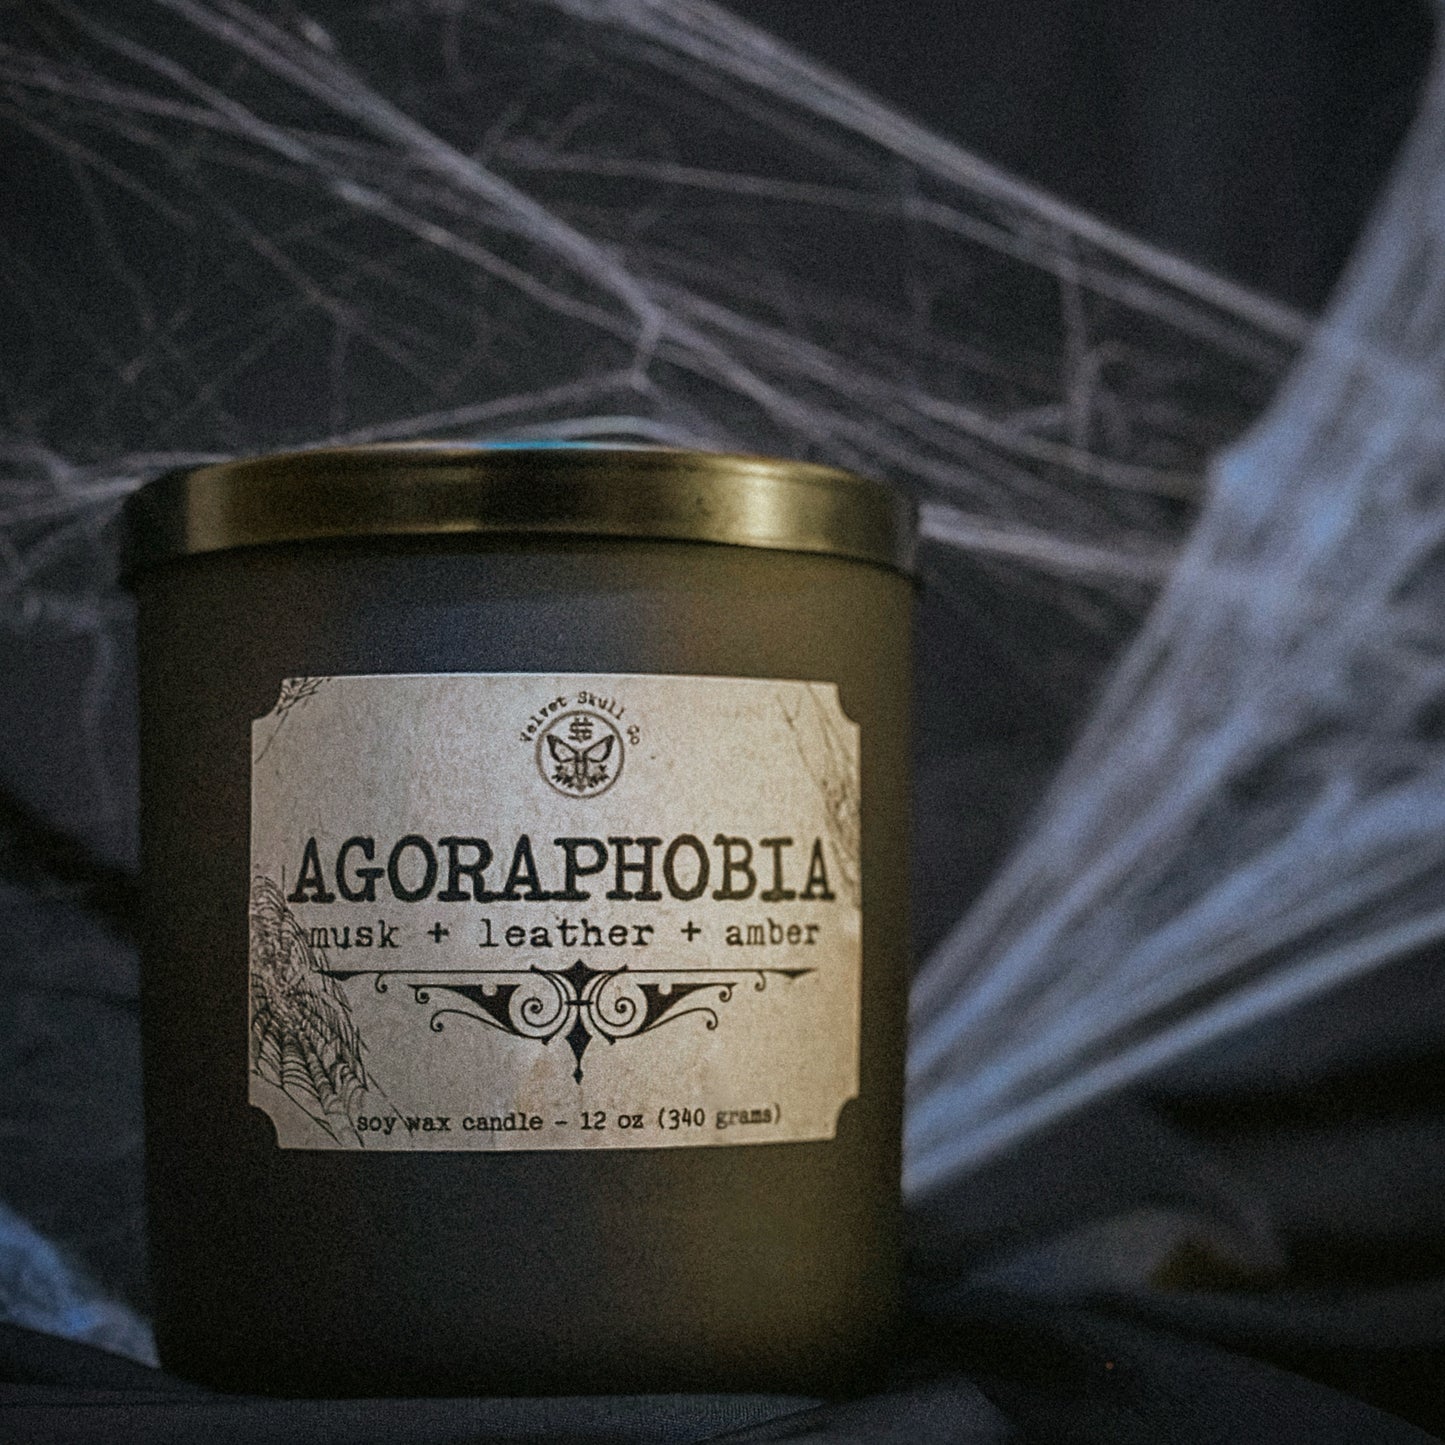 Agoraphobia [unknown places] Candle